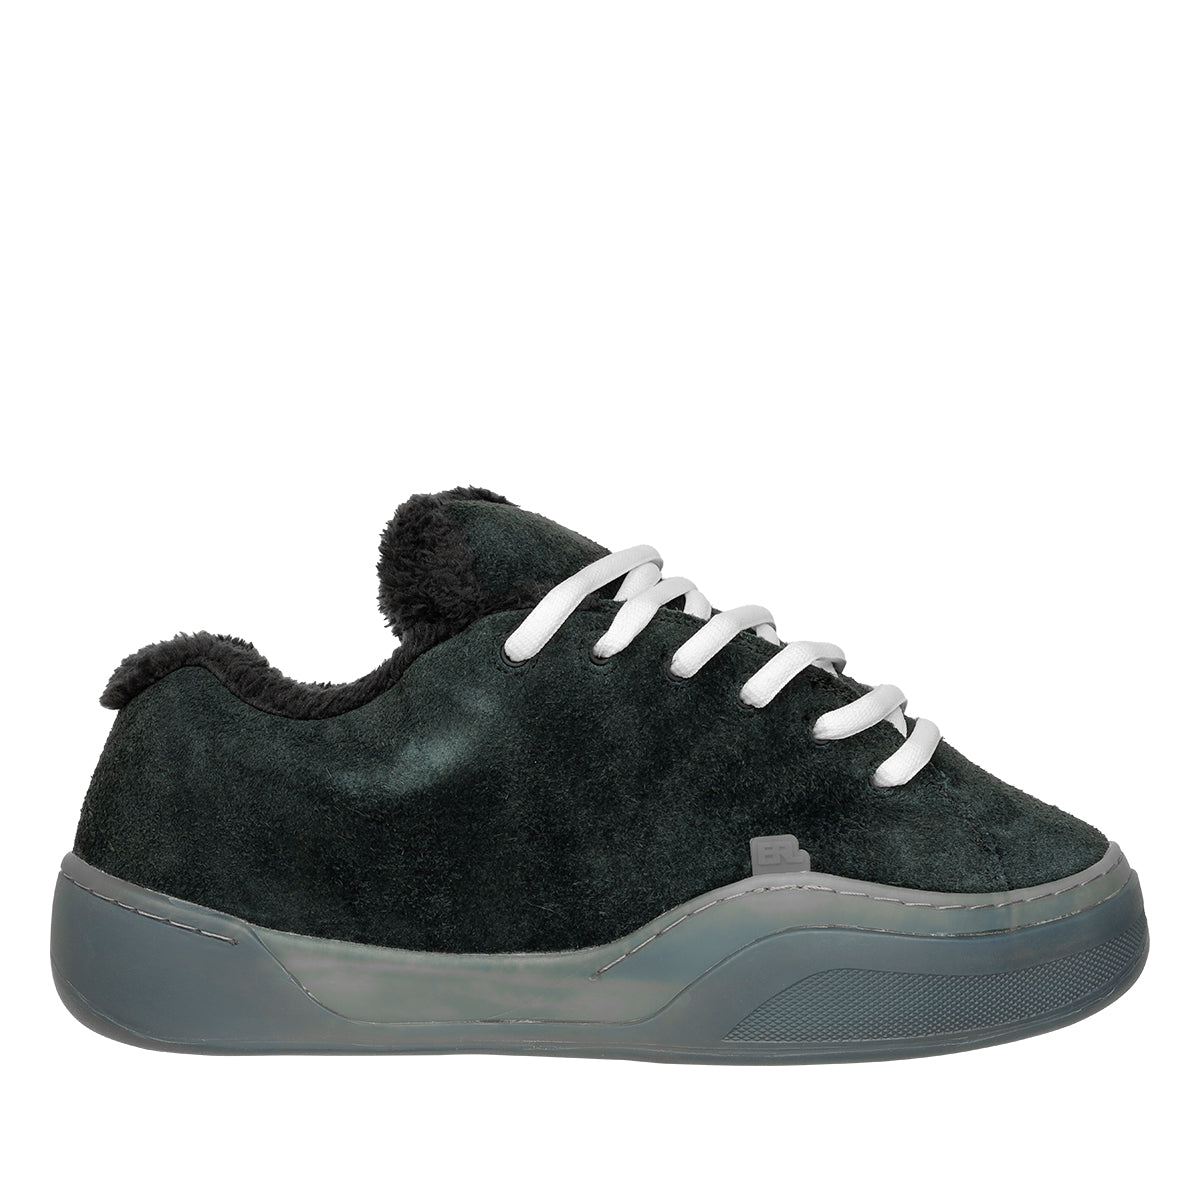 ERL (イーアールエル) - SUEDE VAMPS SNEAKER スニーカー | cherry ...